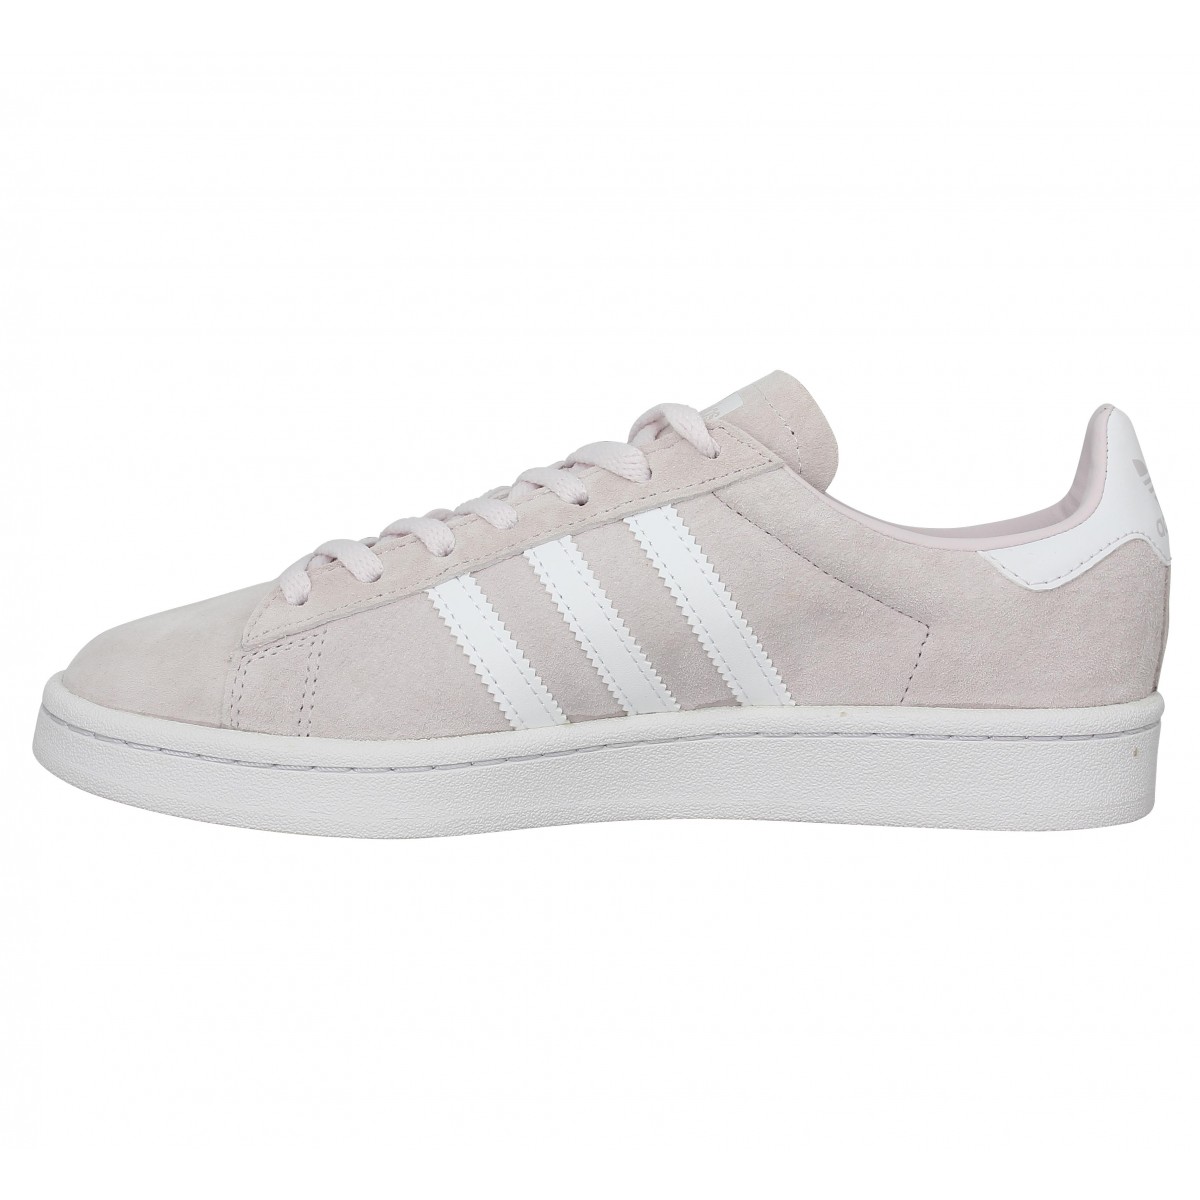 Chaussures Adidas campus velours femme rose pale femme | Fanny 